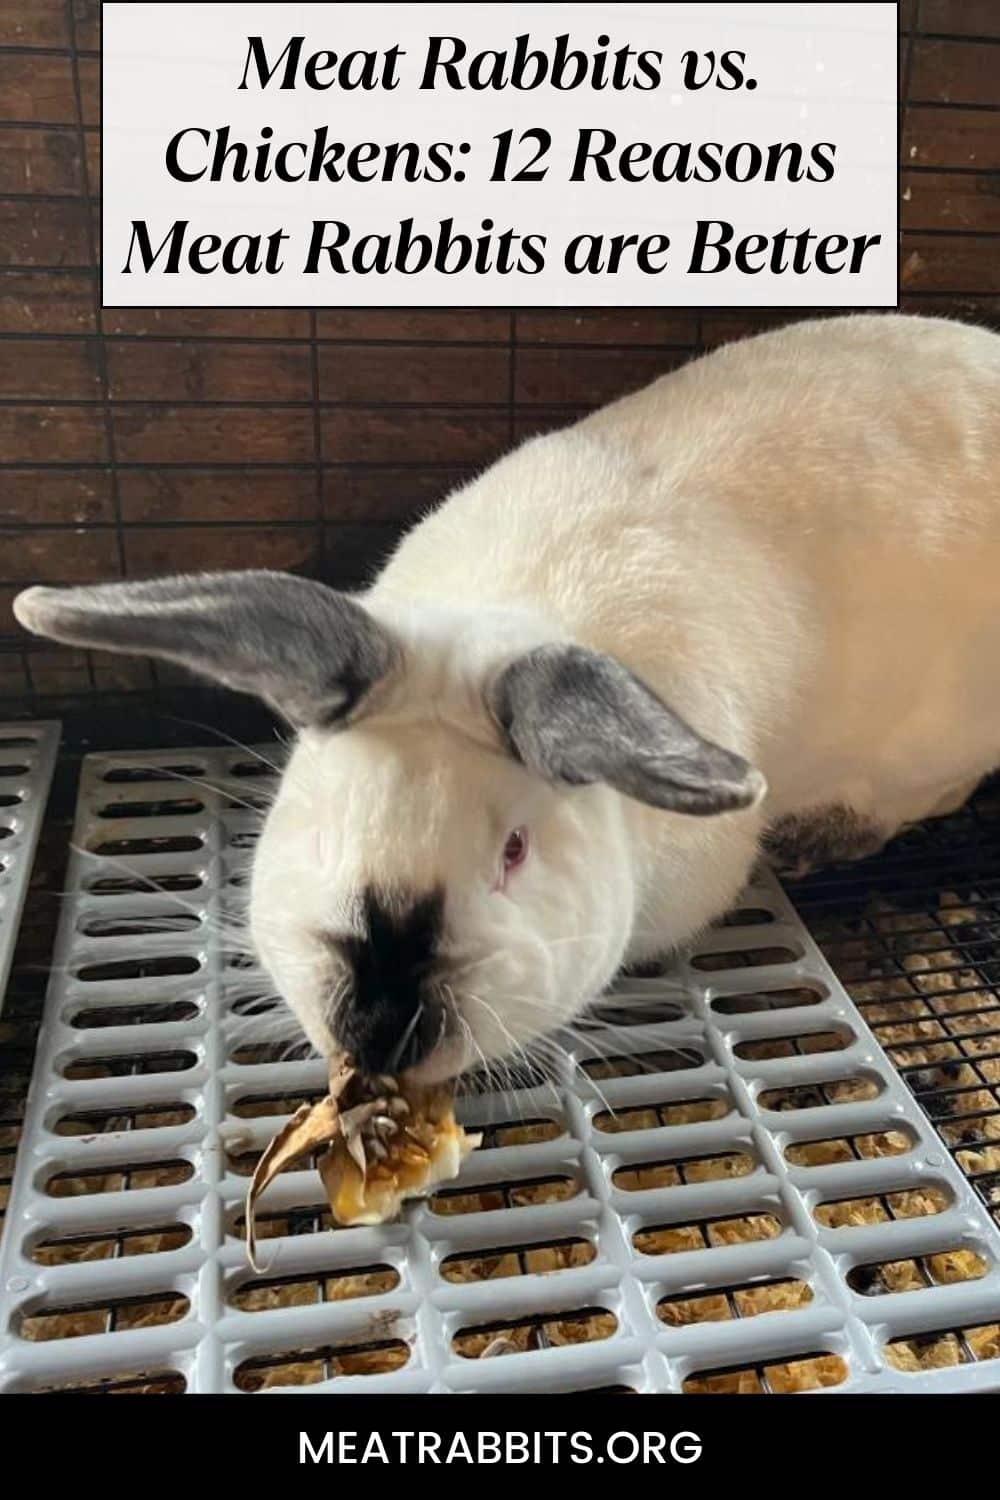 Meat Rabbits vs. Chickens: 12 Reasons Meat Rabbits are Better pinterest image.